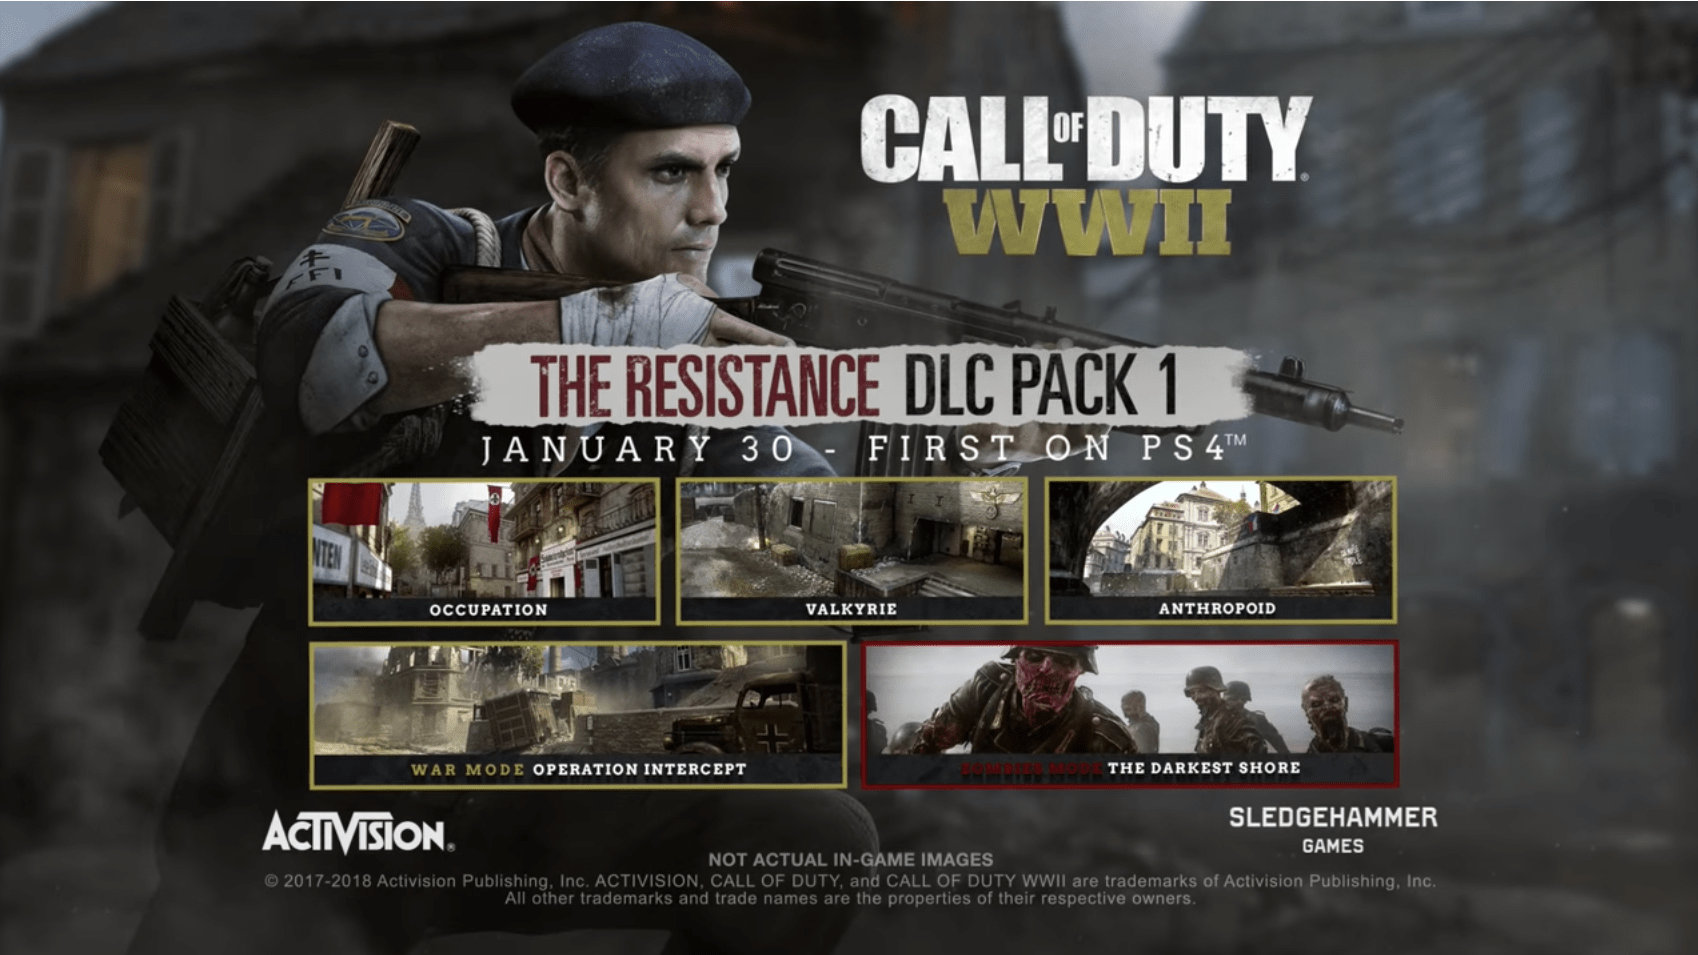 Call of Duty WWII THE RESISTANCE 1